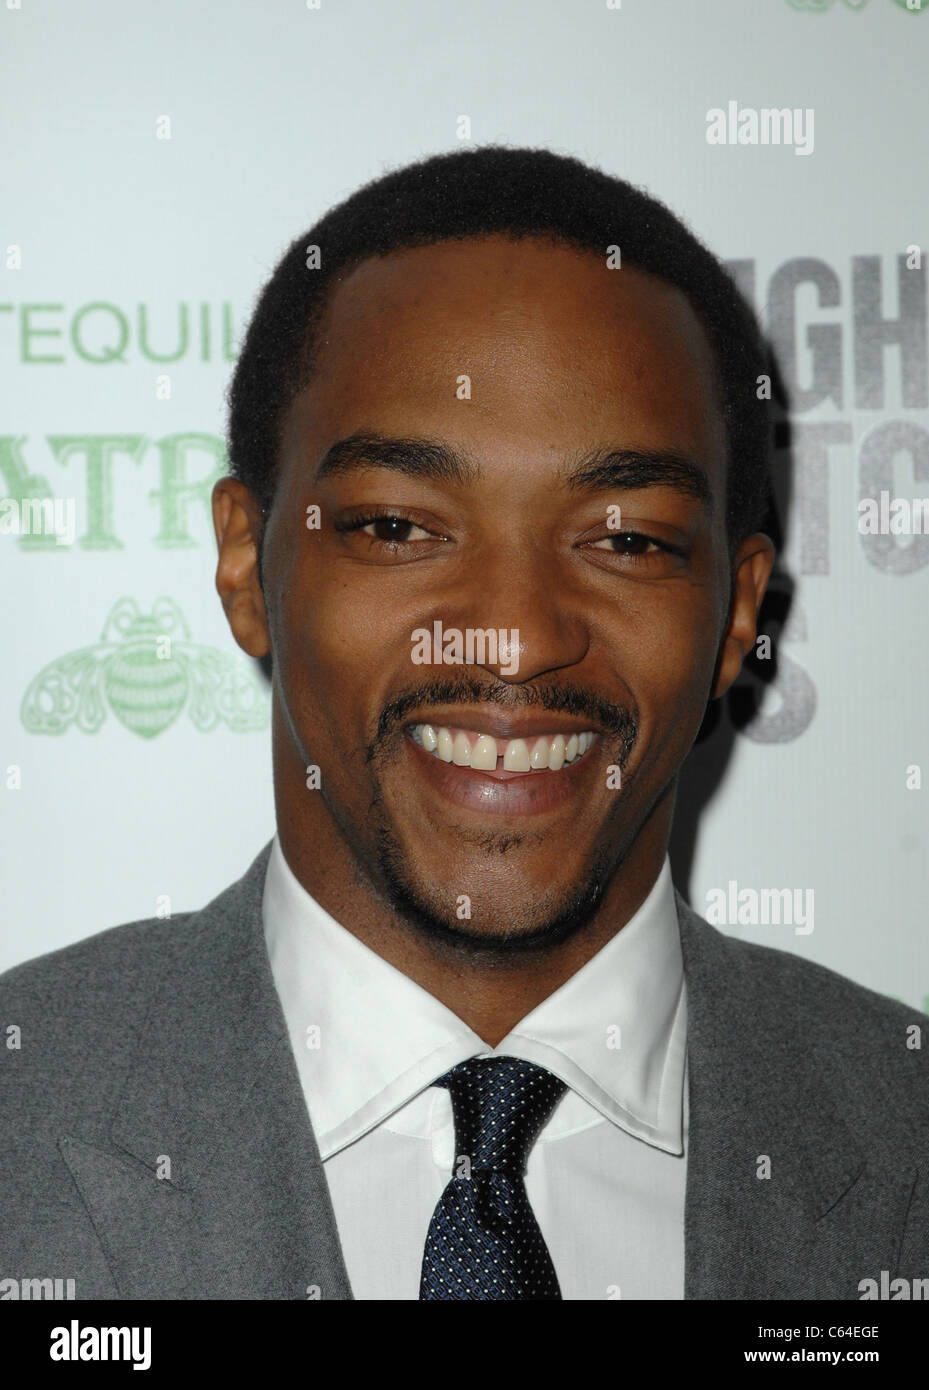 Anthony Mackie at arrivals for NIGHT CATCHES US Screening, AMC Loews 19th Street East Theater, New York, NY November 11, 2010. Photo By: William D. Bird/Everett Collection Stock Photo